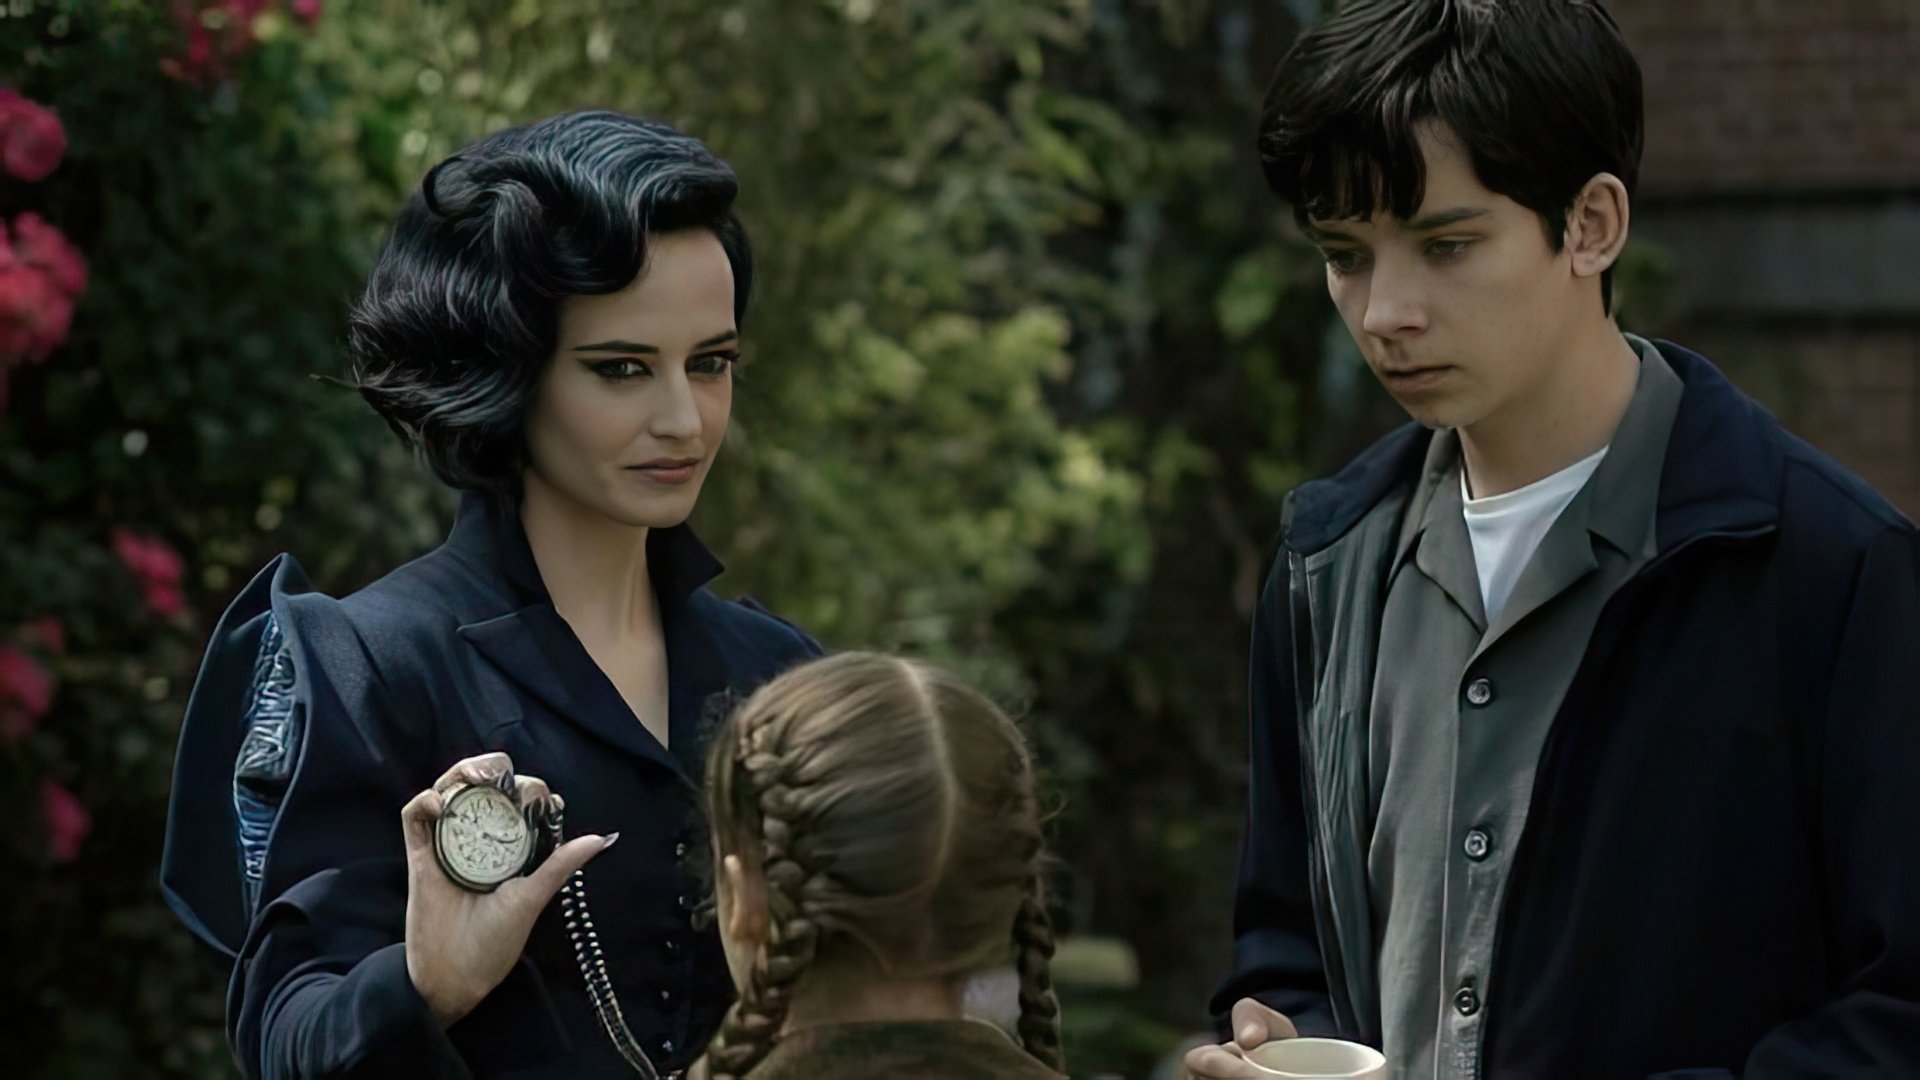 «Miss Peregrine’s Home for Peculiar Children»: Eva Green and Asa Butterfield